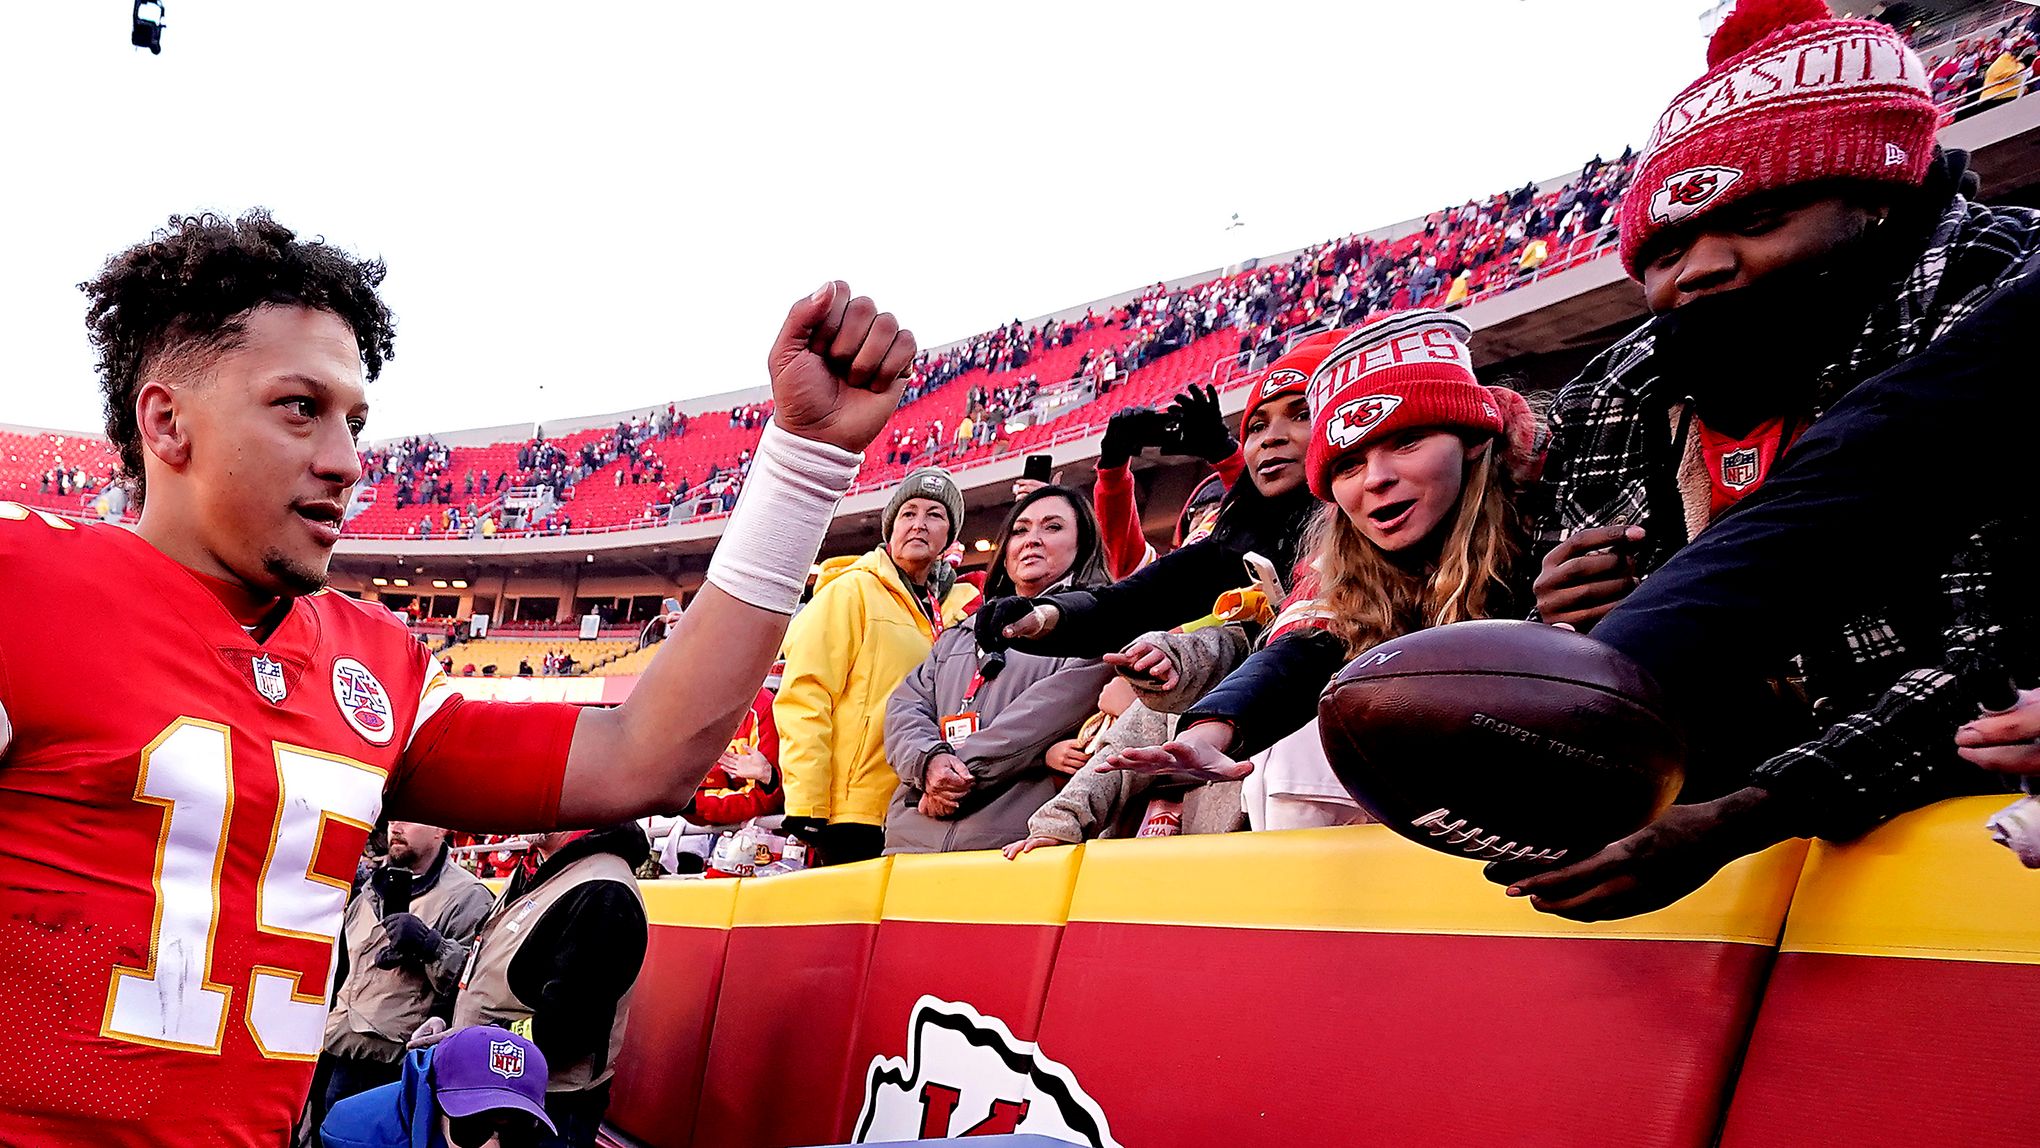 Chiefs to take on Chargers in home opener, tickets go on sale Friday